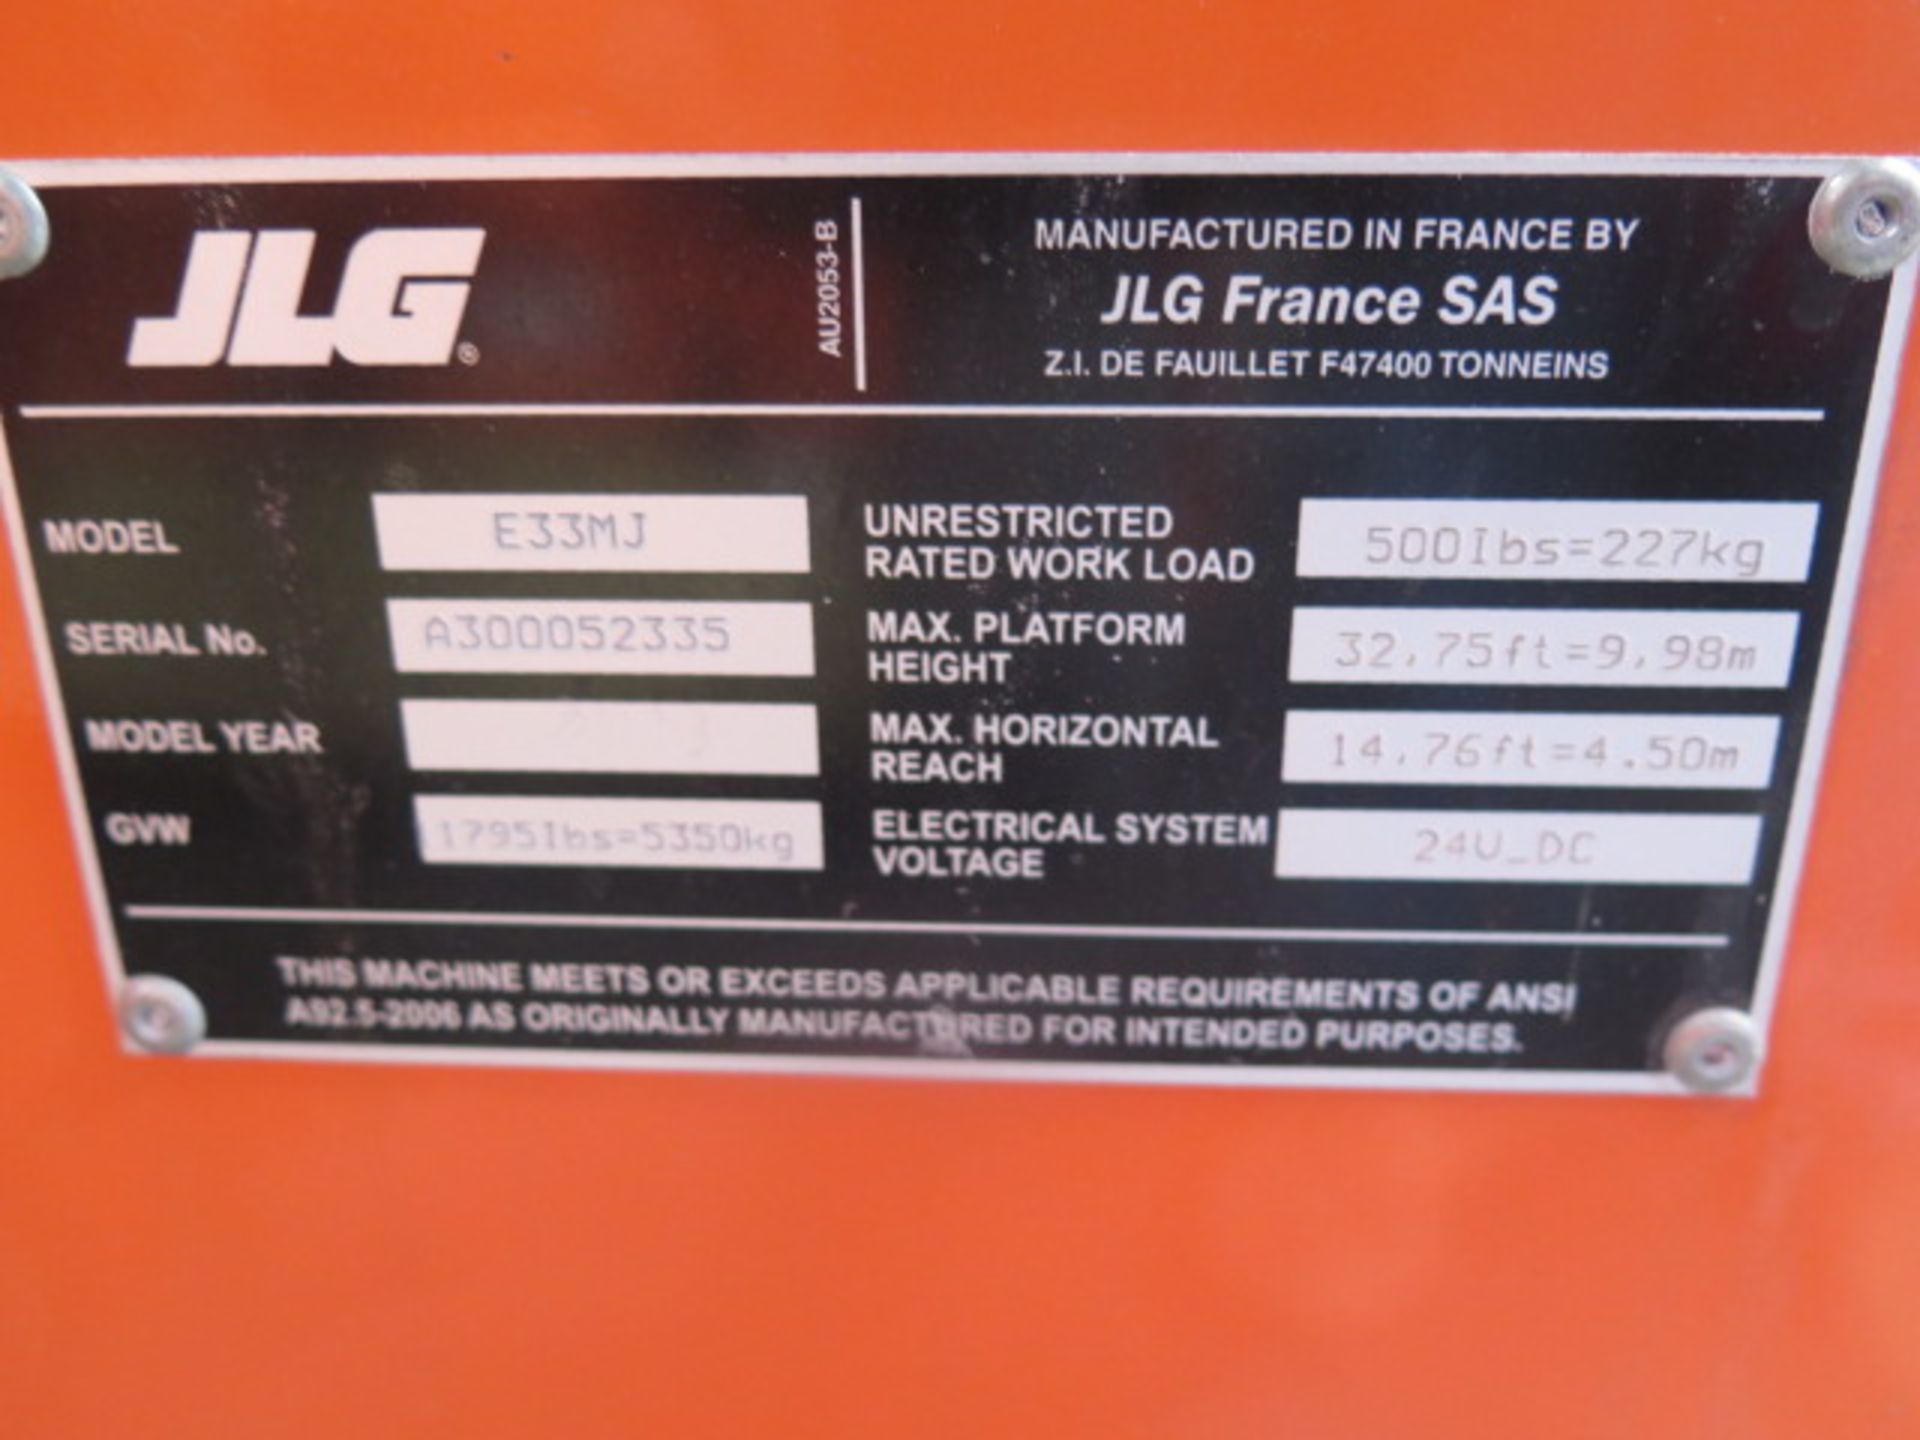 2013 JLG Toucan E33MJ Electric Boom Lift s/n A300052335 w/ 32.75' Max Platform Height, SOLD AS IS - Image 19 of 19